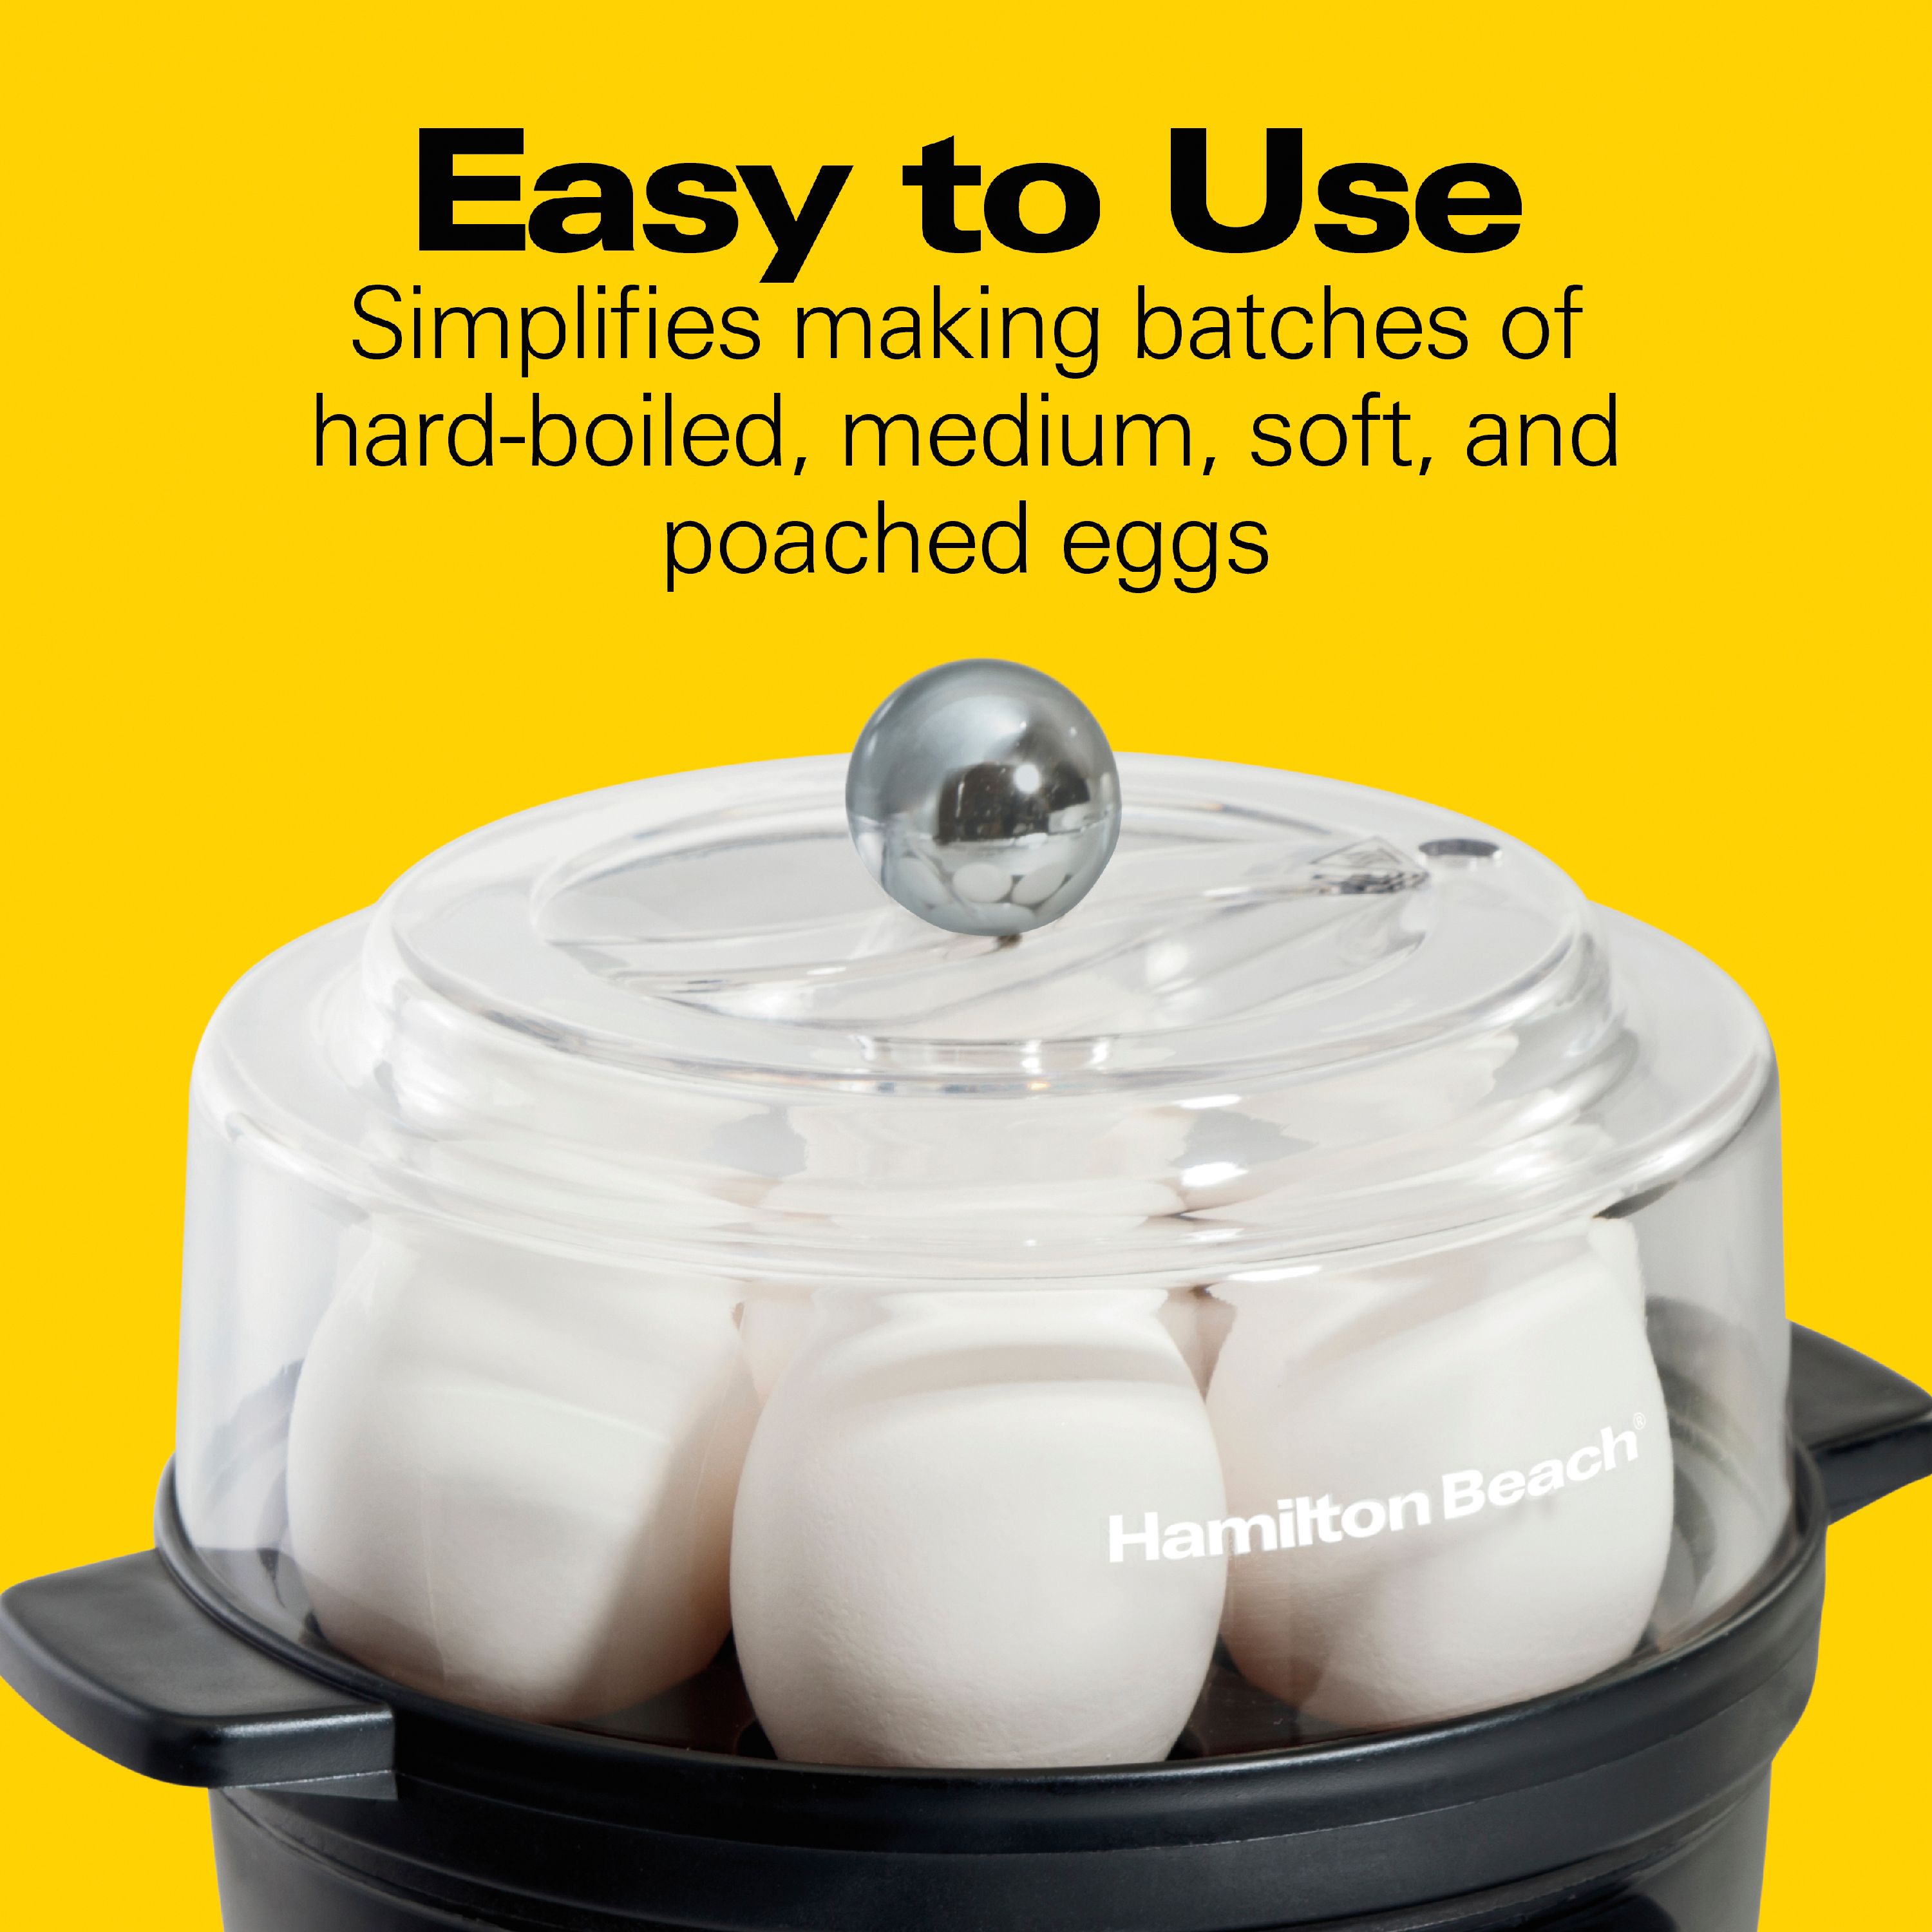 Hamilton Beach Egg Cooker with Built-In Timer and Poaching Tray, 7 Eggs, Black, 25500 - image 3 of 13